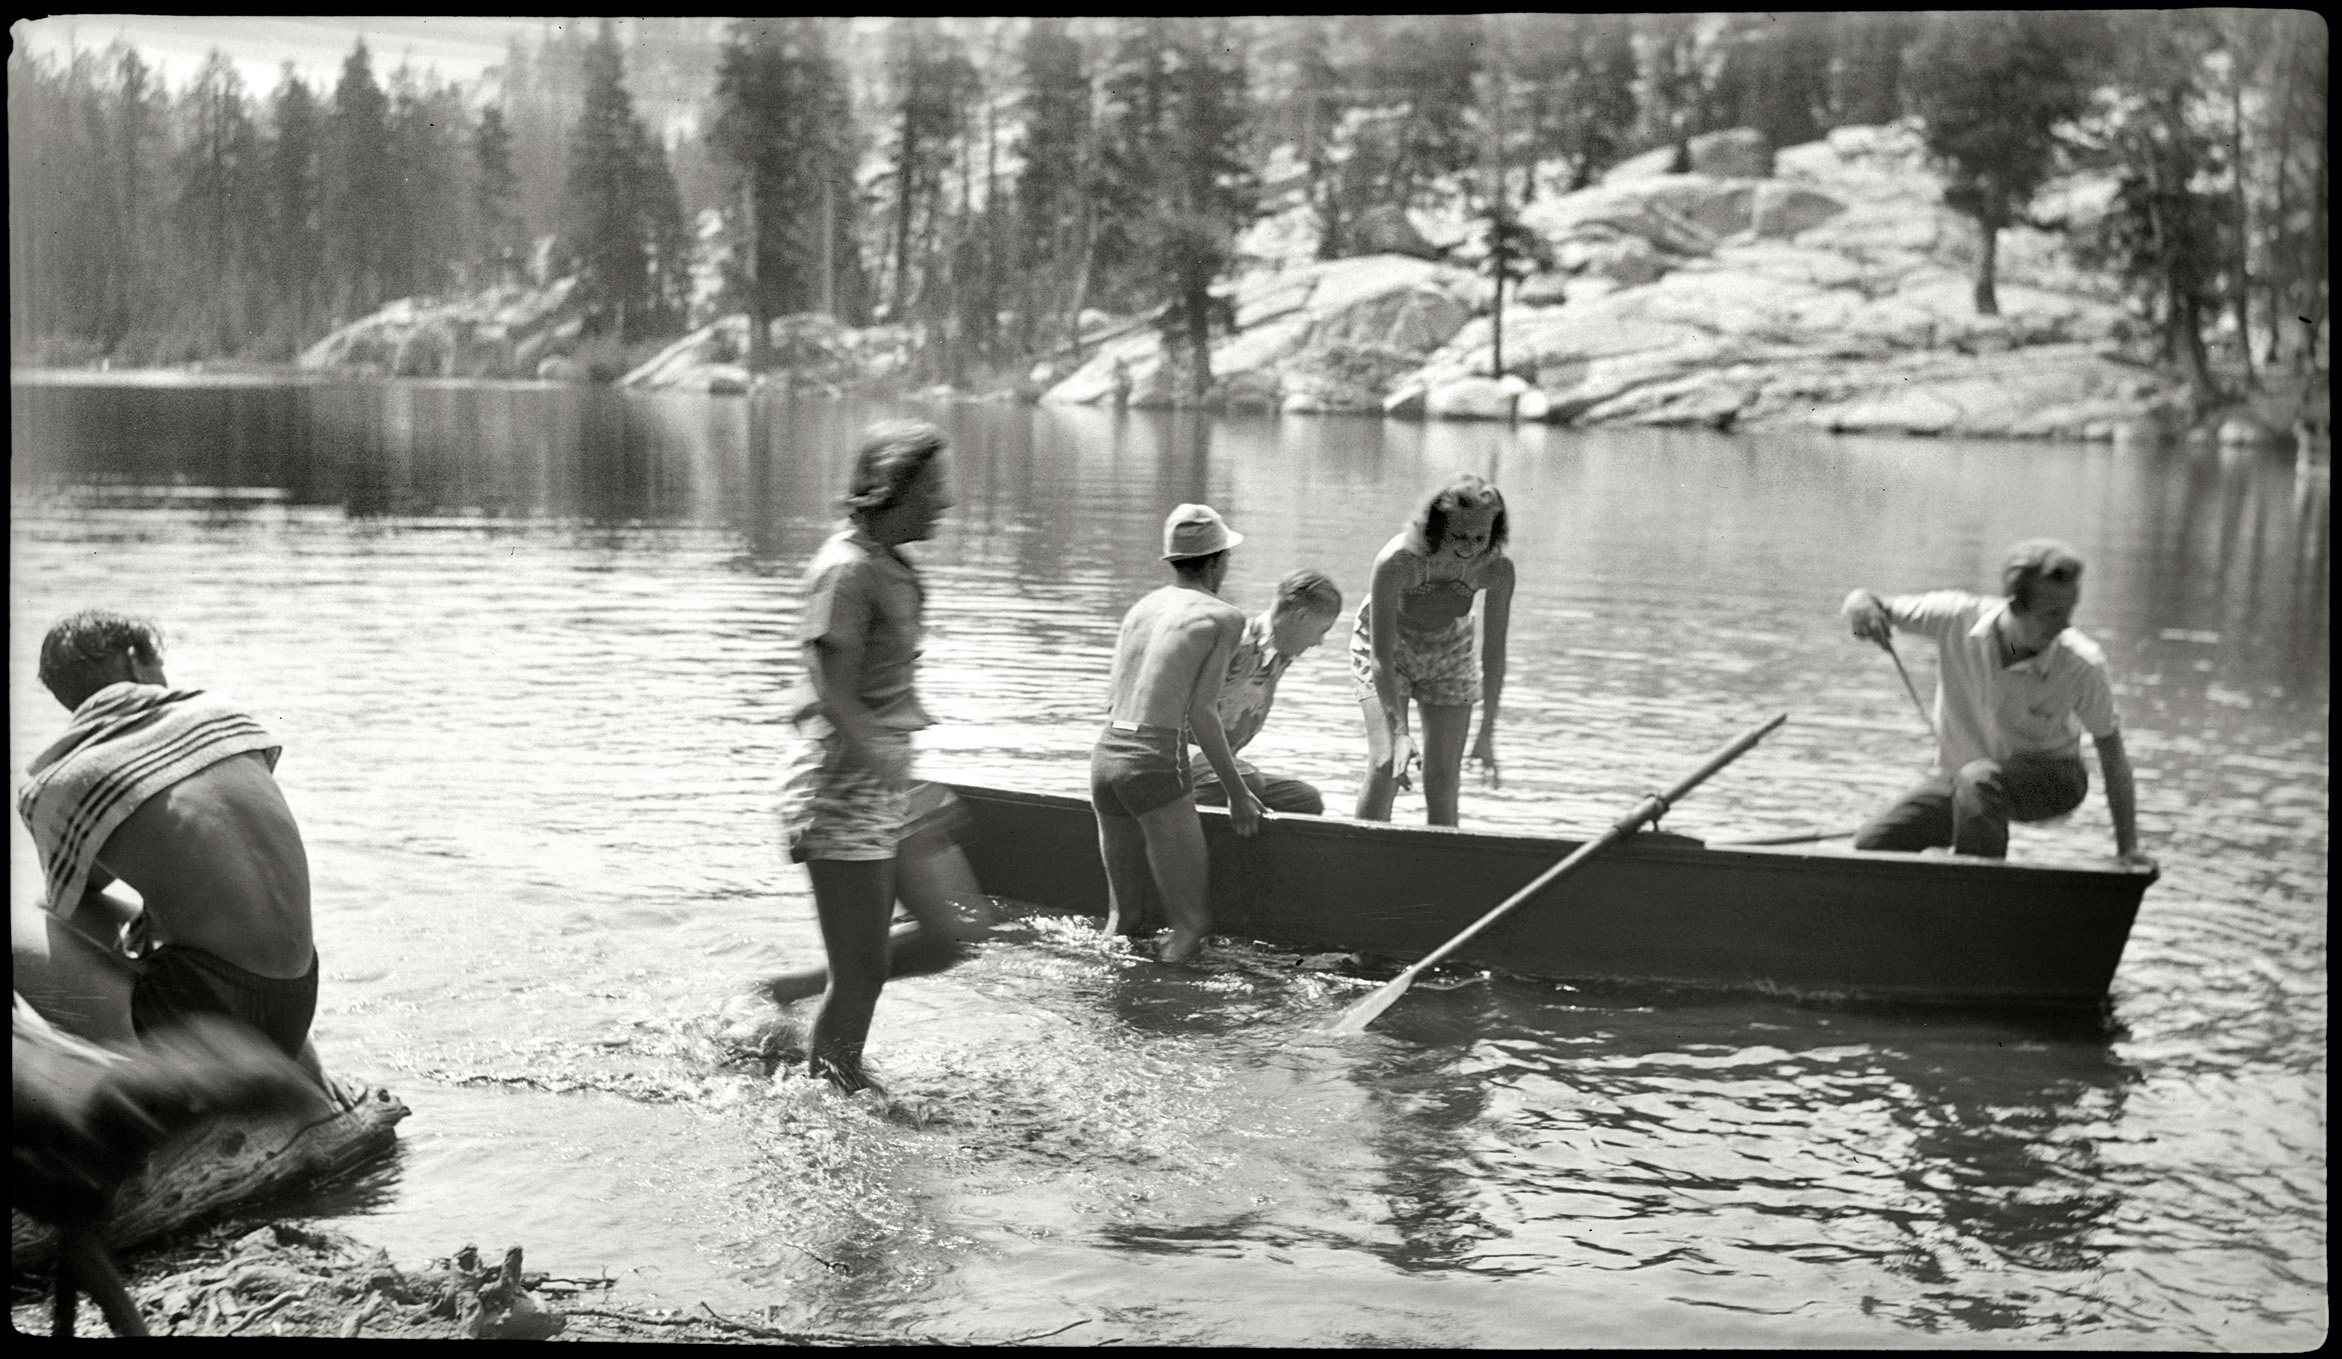 I'd reckon this is the late 1930s in Yosemite. Yosemite seems to be where a lot of these travel pictures were taken. And I can generally judge the age by the kind of negative it is, which is a larger size than the later ones from the '50s and '60s. But tterrace disagrees on the age:

The aspect ratio of the negs is the same as those in our collection from 116 roll film, neg size 2¼ x 4 inches. A popular Kodak Brownie size that could be contact-printed for snapshot-sized prints. Ours date all the way from 1919 up through 1946. Judging by the clothing here, this seems considerably later; 1960s maybe?

What do you think? Scanned from the 4 x 2½ inch negative. View full size.